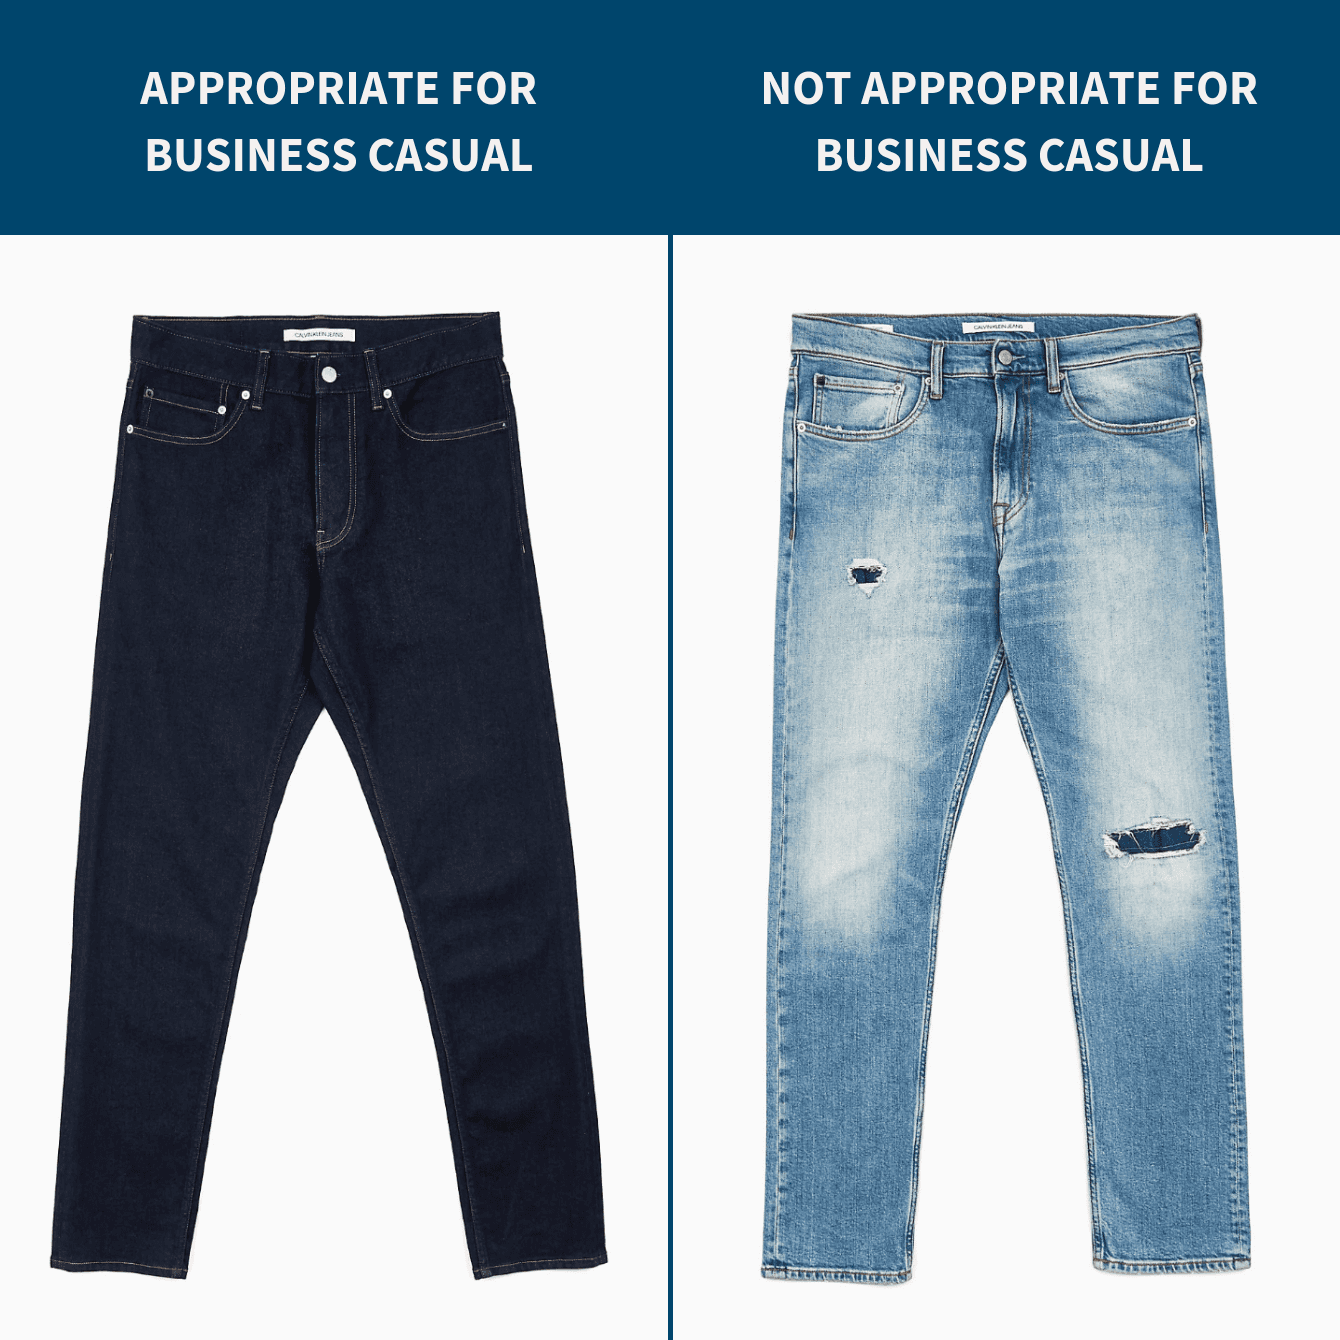 jeans appropriate for business casual